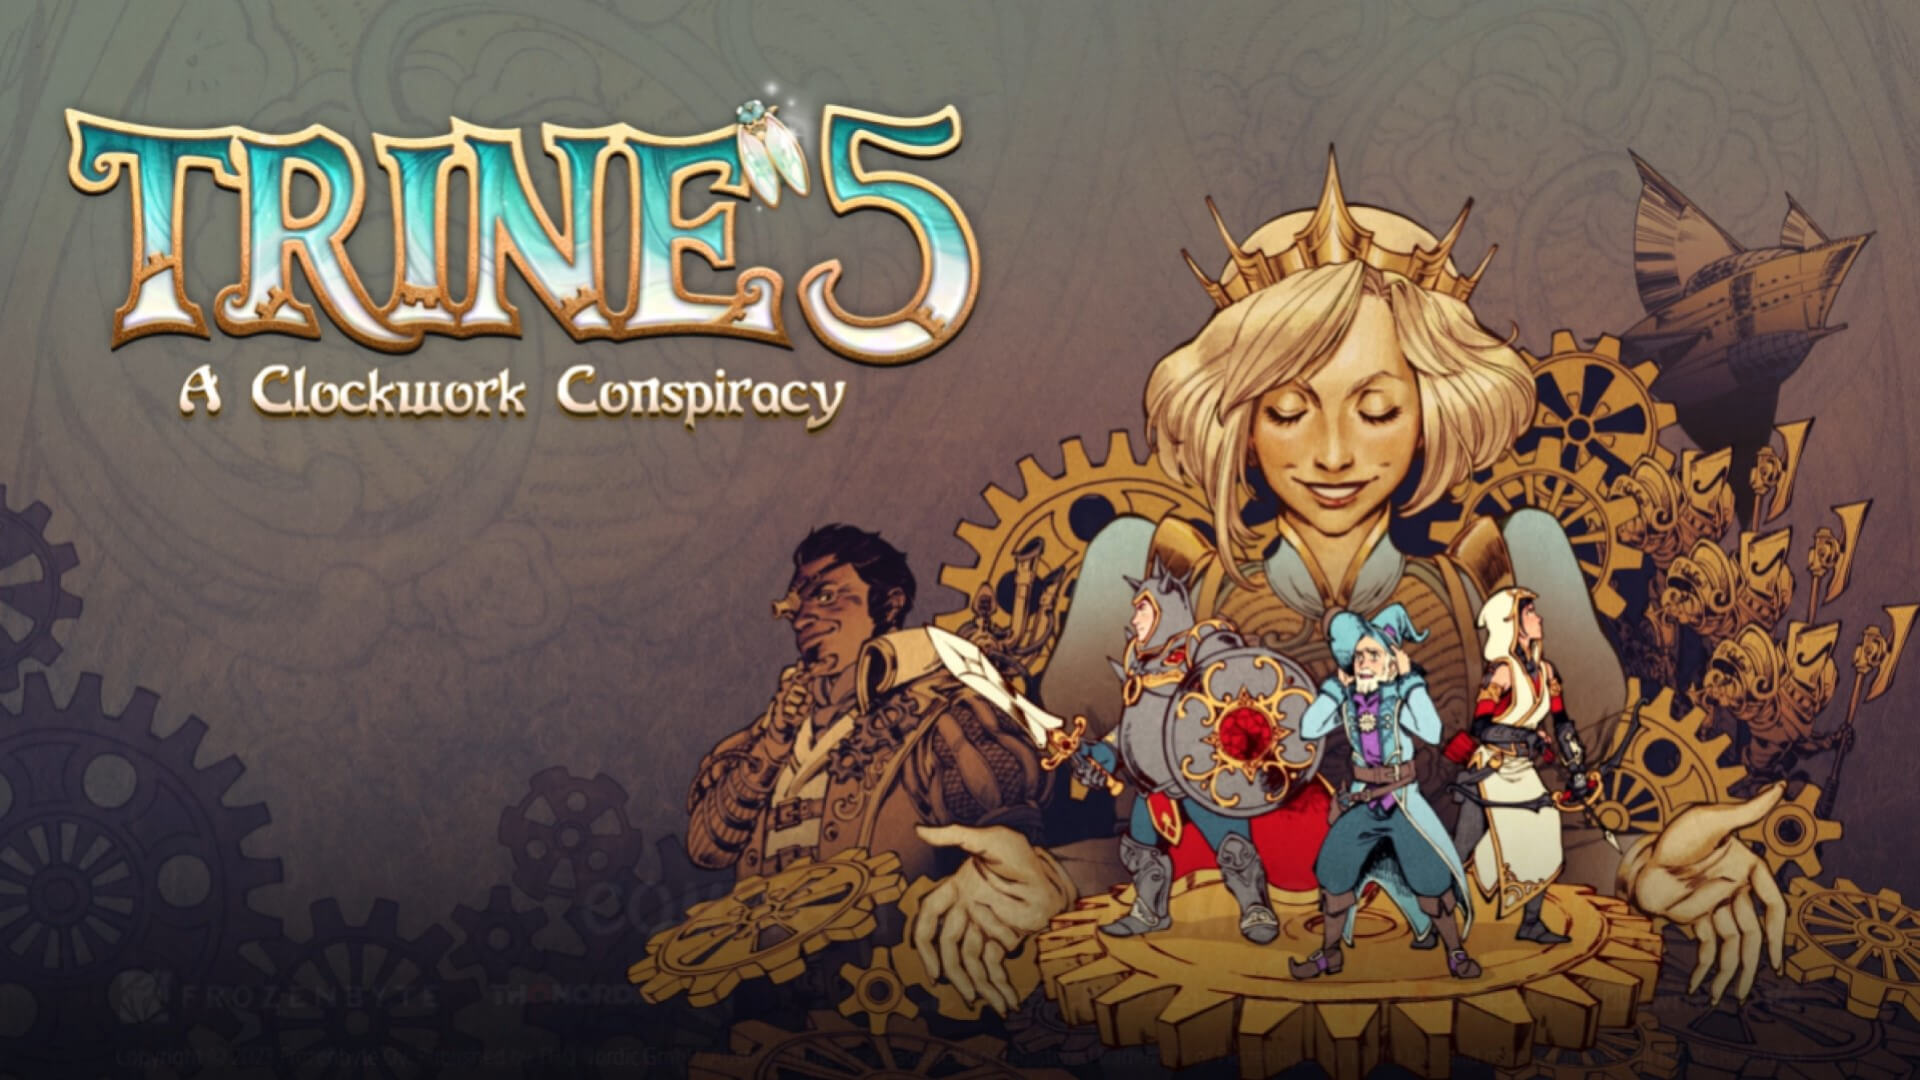 download the new version for iphoneTrine 5: A Clockwork Conspiracy